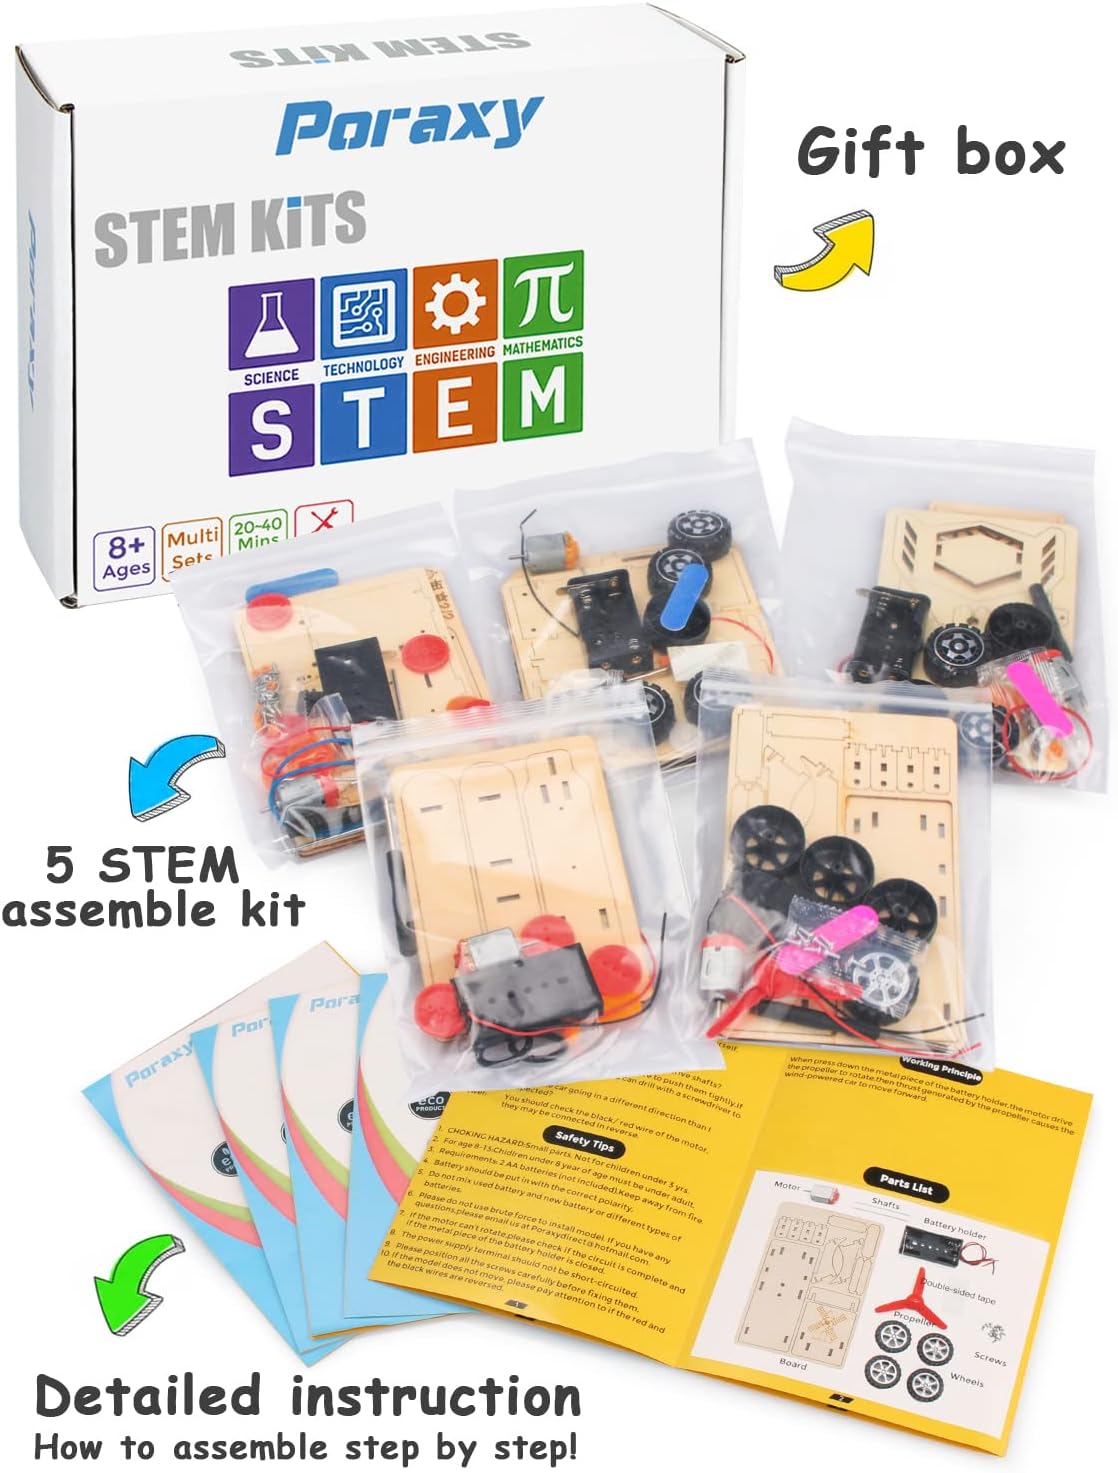  10 in 1 STEM Kit for Kids Ages 8-12, Wooden Model Kits for Boys  to Bulid, Wood Projects Buliding Toys,3D Wood Puzzles Craft for Age 6 7 8 9  10 11 12 : Toys & Games